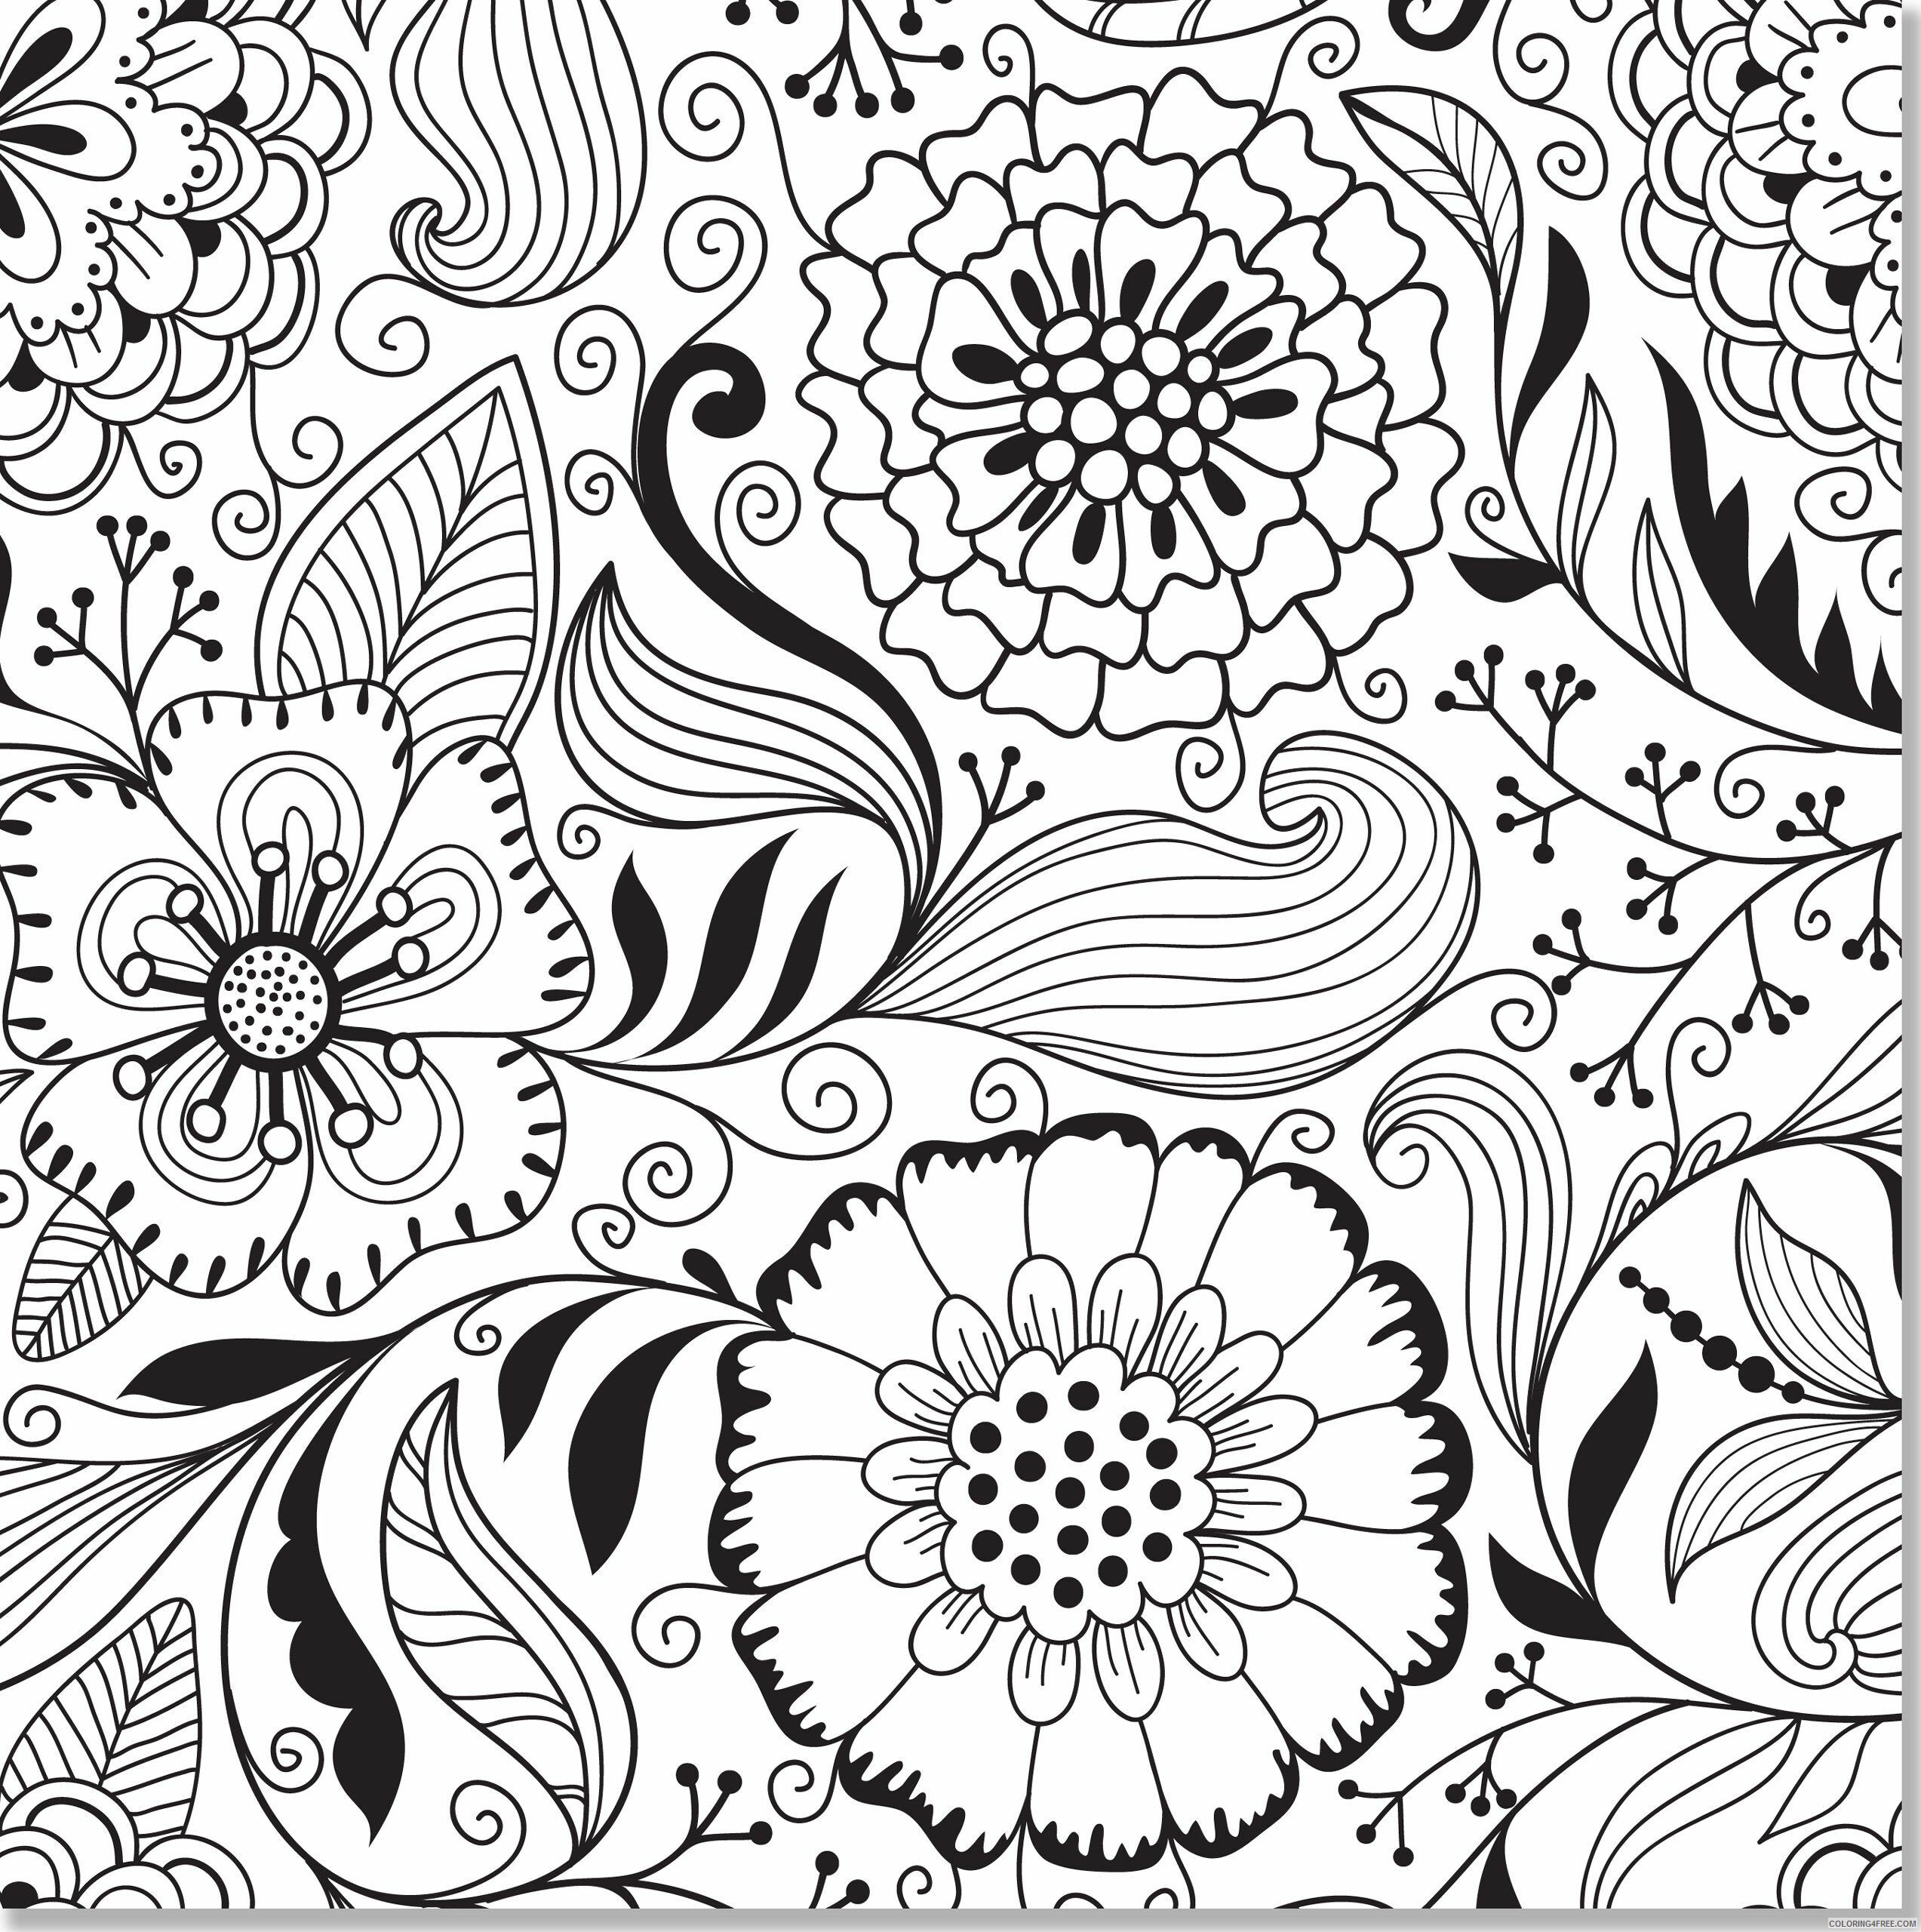 Adult Coloring Pages To Print Printable Sheets Abstract Designs jetis 2021 a 2146 Coloring4free